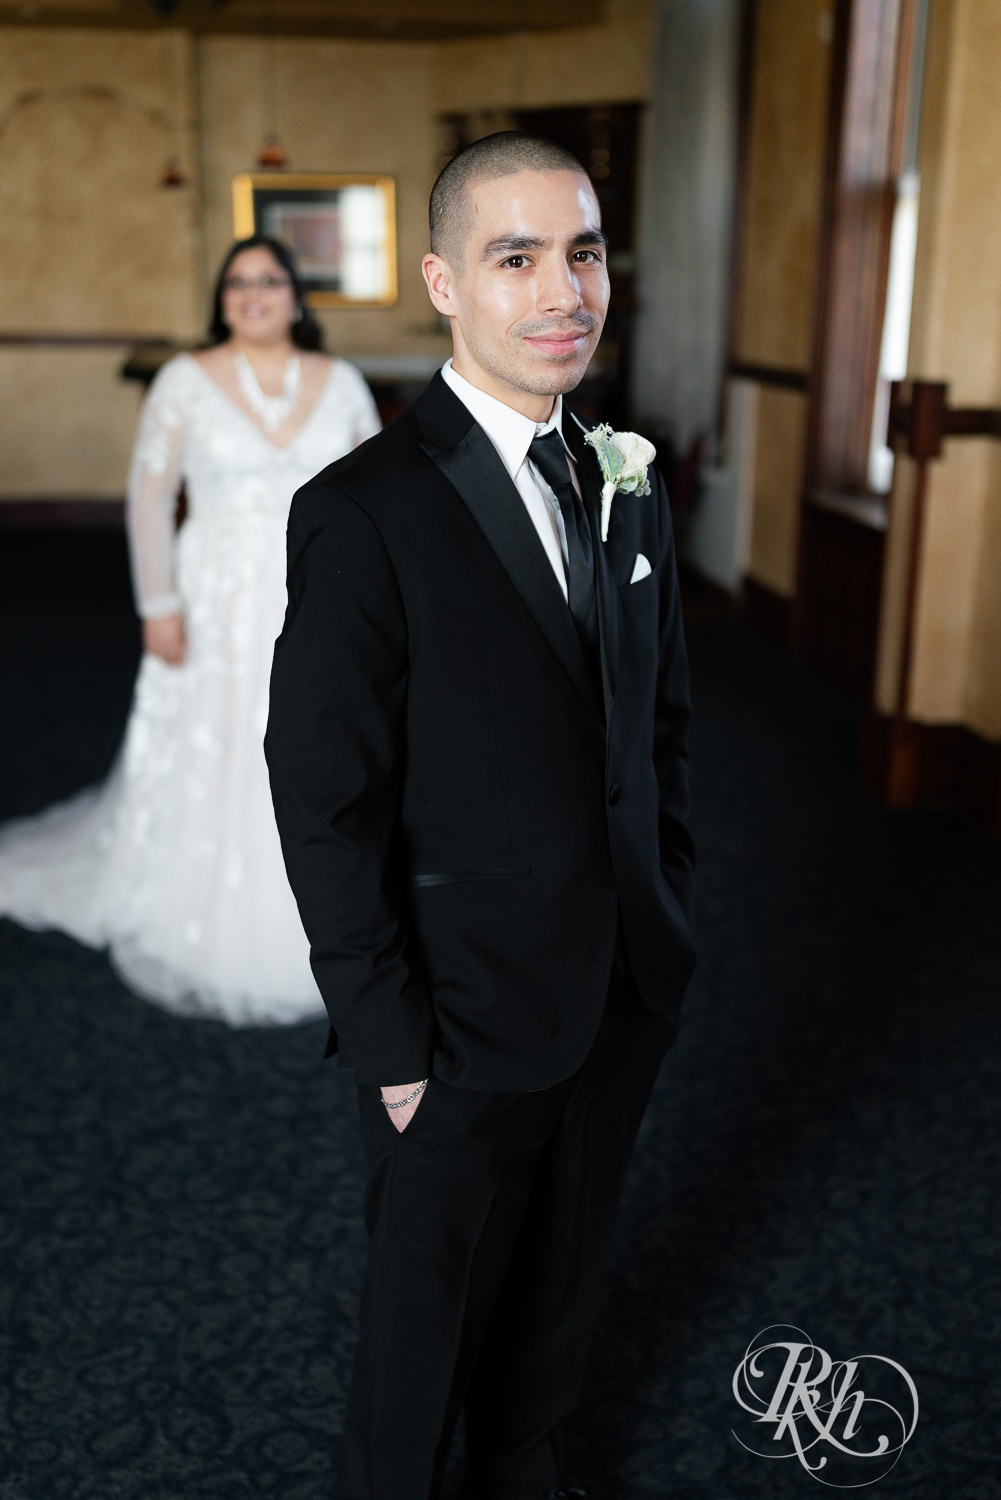 First look between bride and groom at the Historic Concord Exchange in Saint Paul, Minnesota.